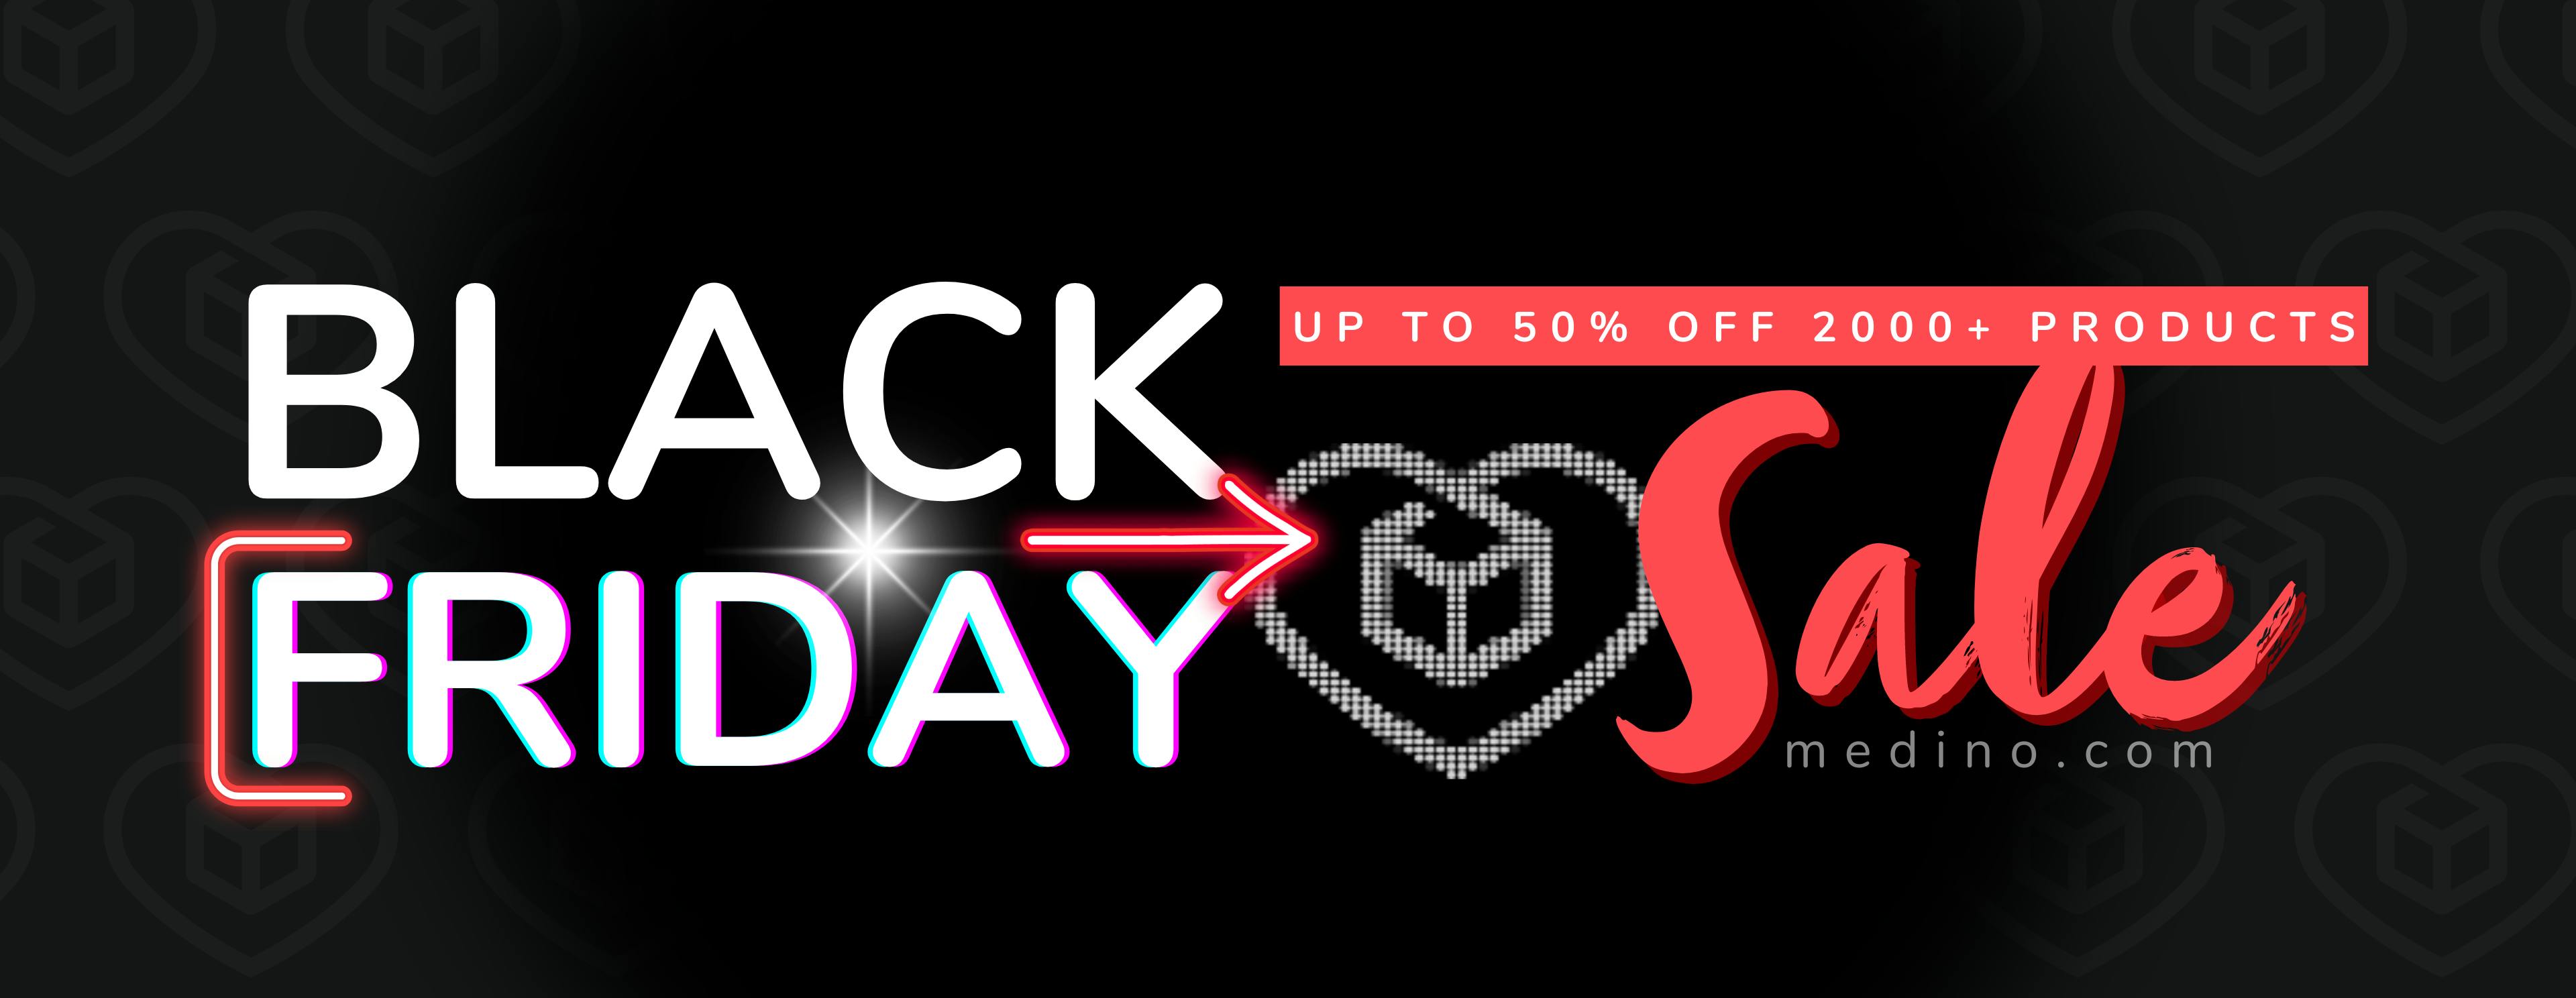 White text on black background saying: 'Black Friday Sale, up to 50% off 1000+ products, at medino.com'